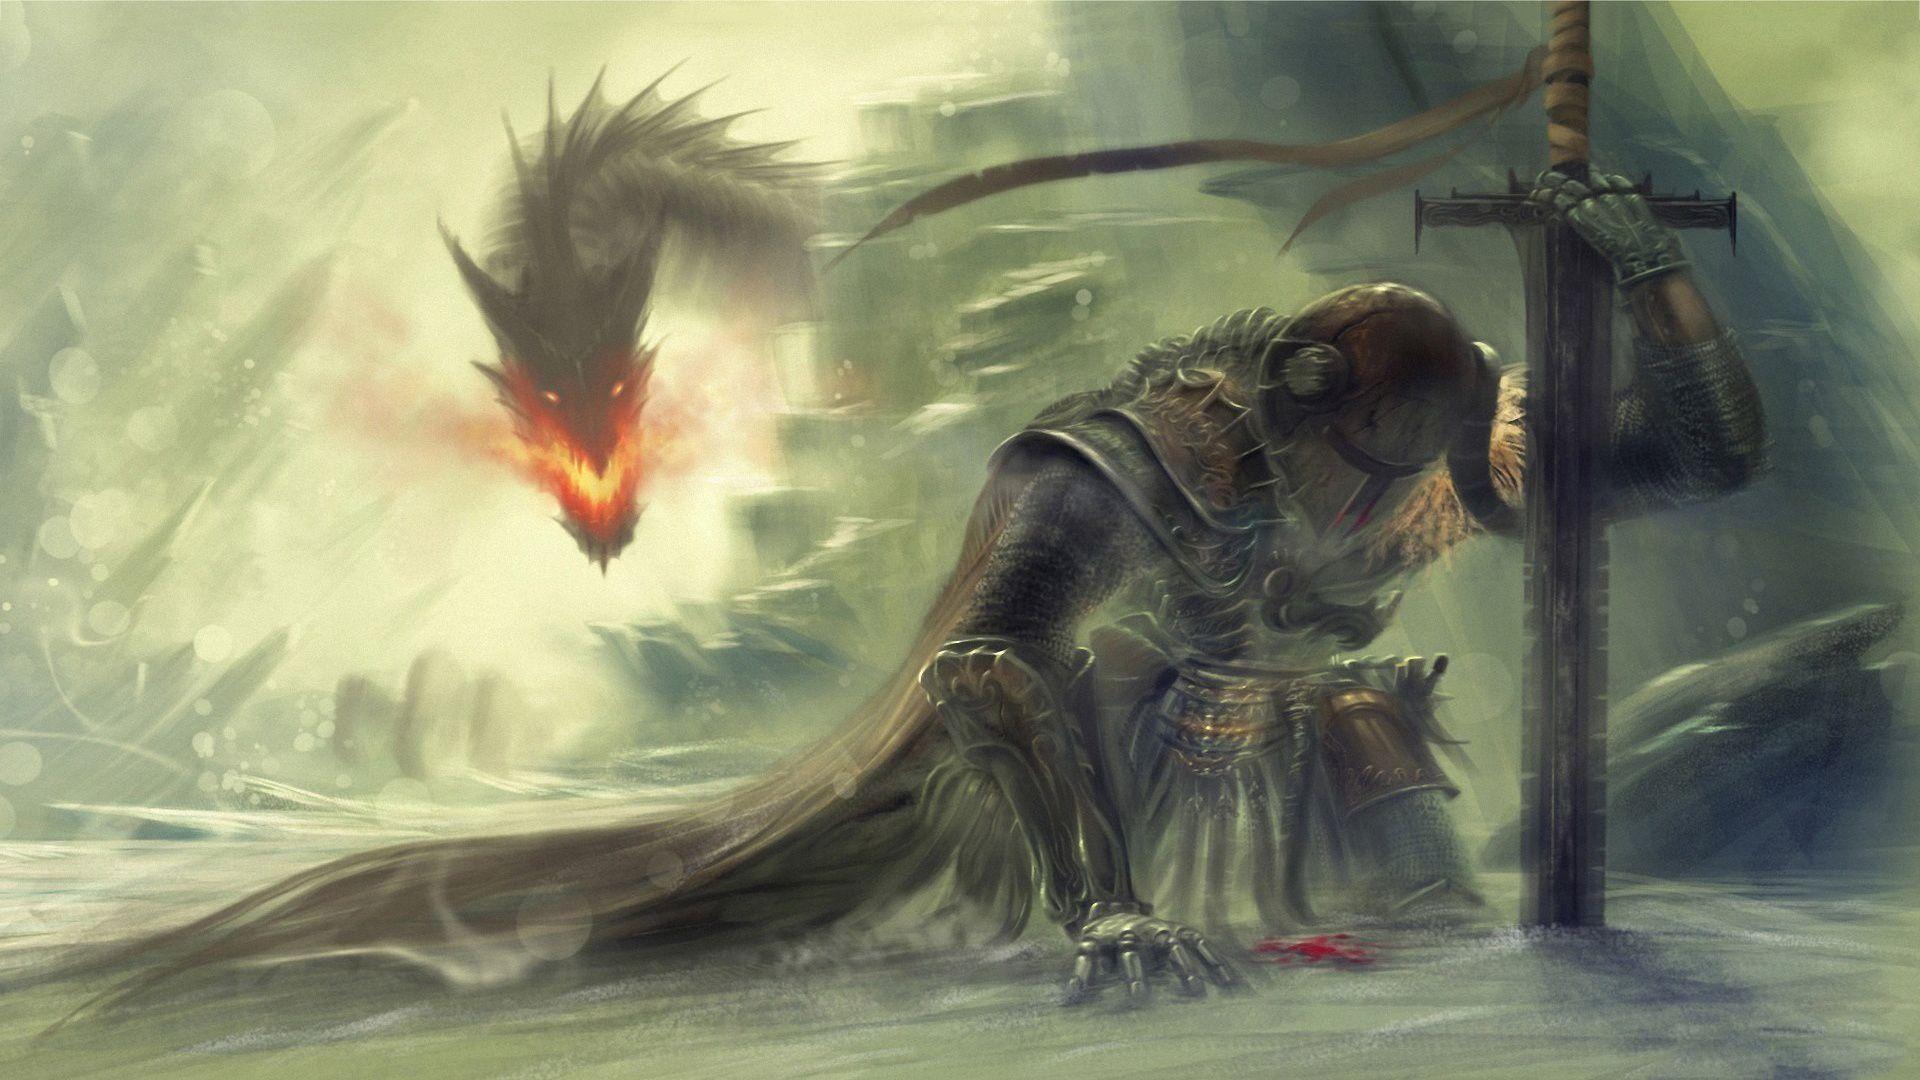 Dragon vs Knight Wallpapers - Top Free Dragon vs Knight Backgrounds